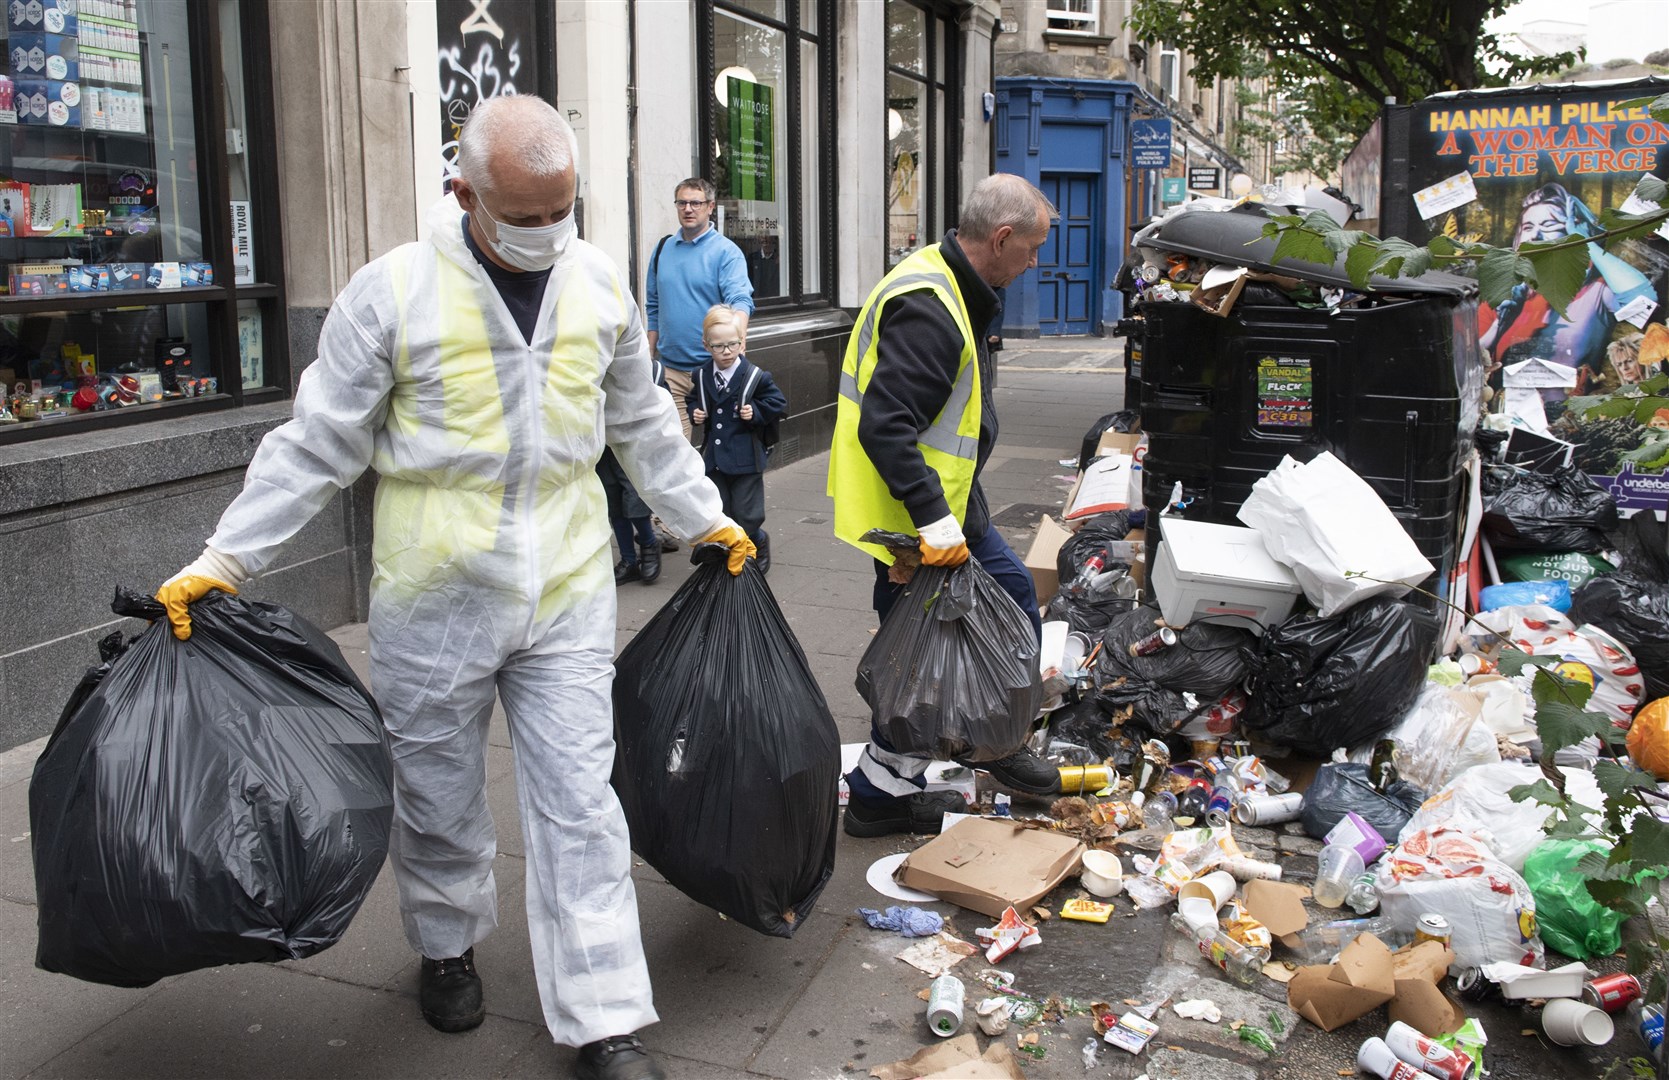 The strikes coincided with action in Edinburgh which left the streets littered with rubbish (Lesley Martin/PA)